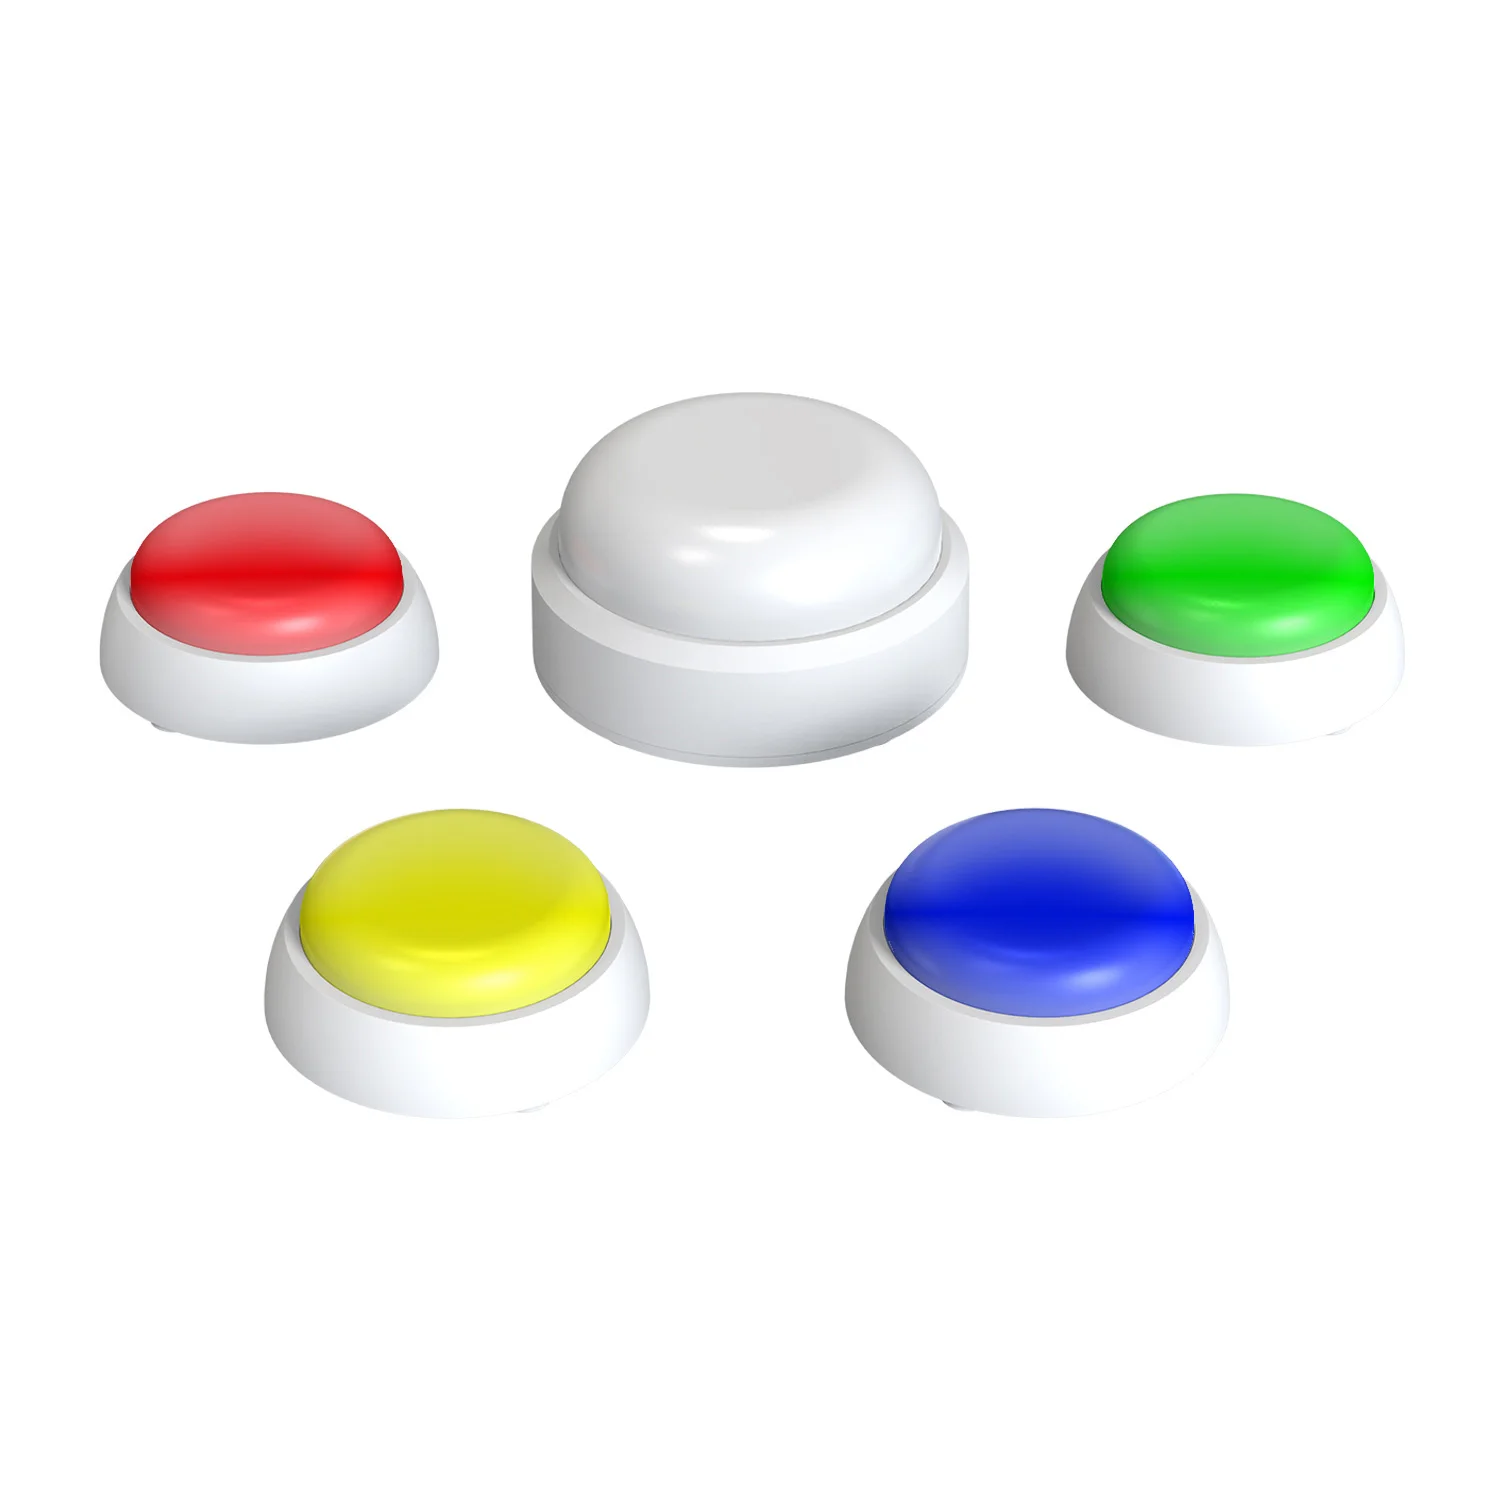 Education and Gaming Resources Sound and Light Answer Buzzer